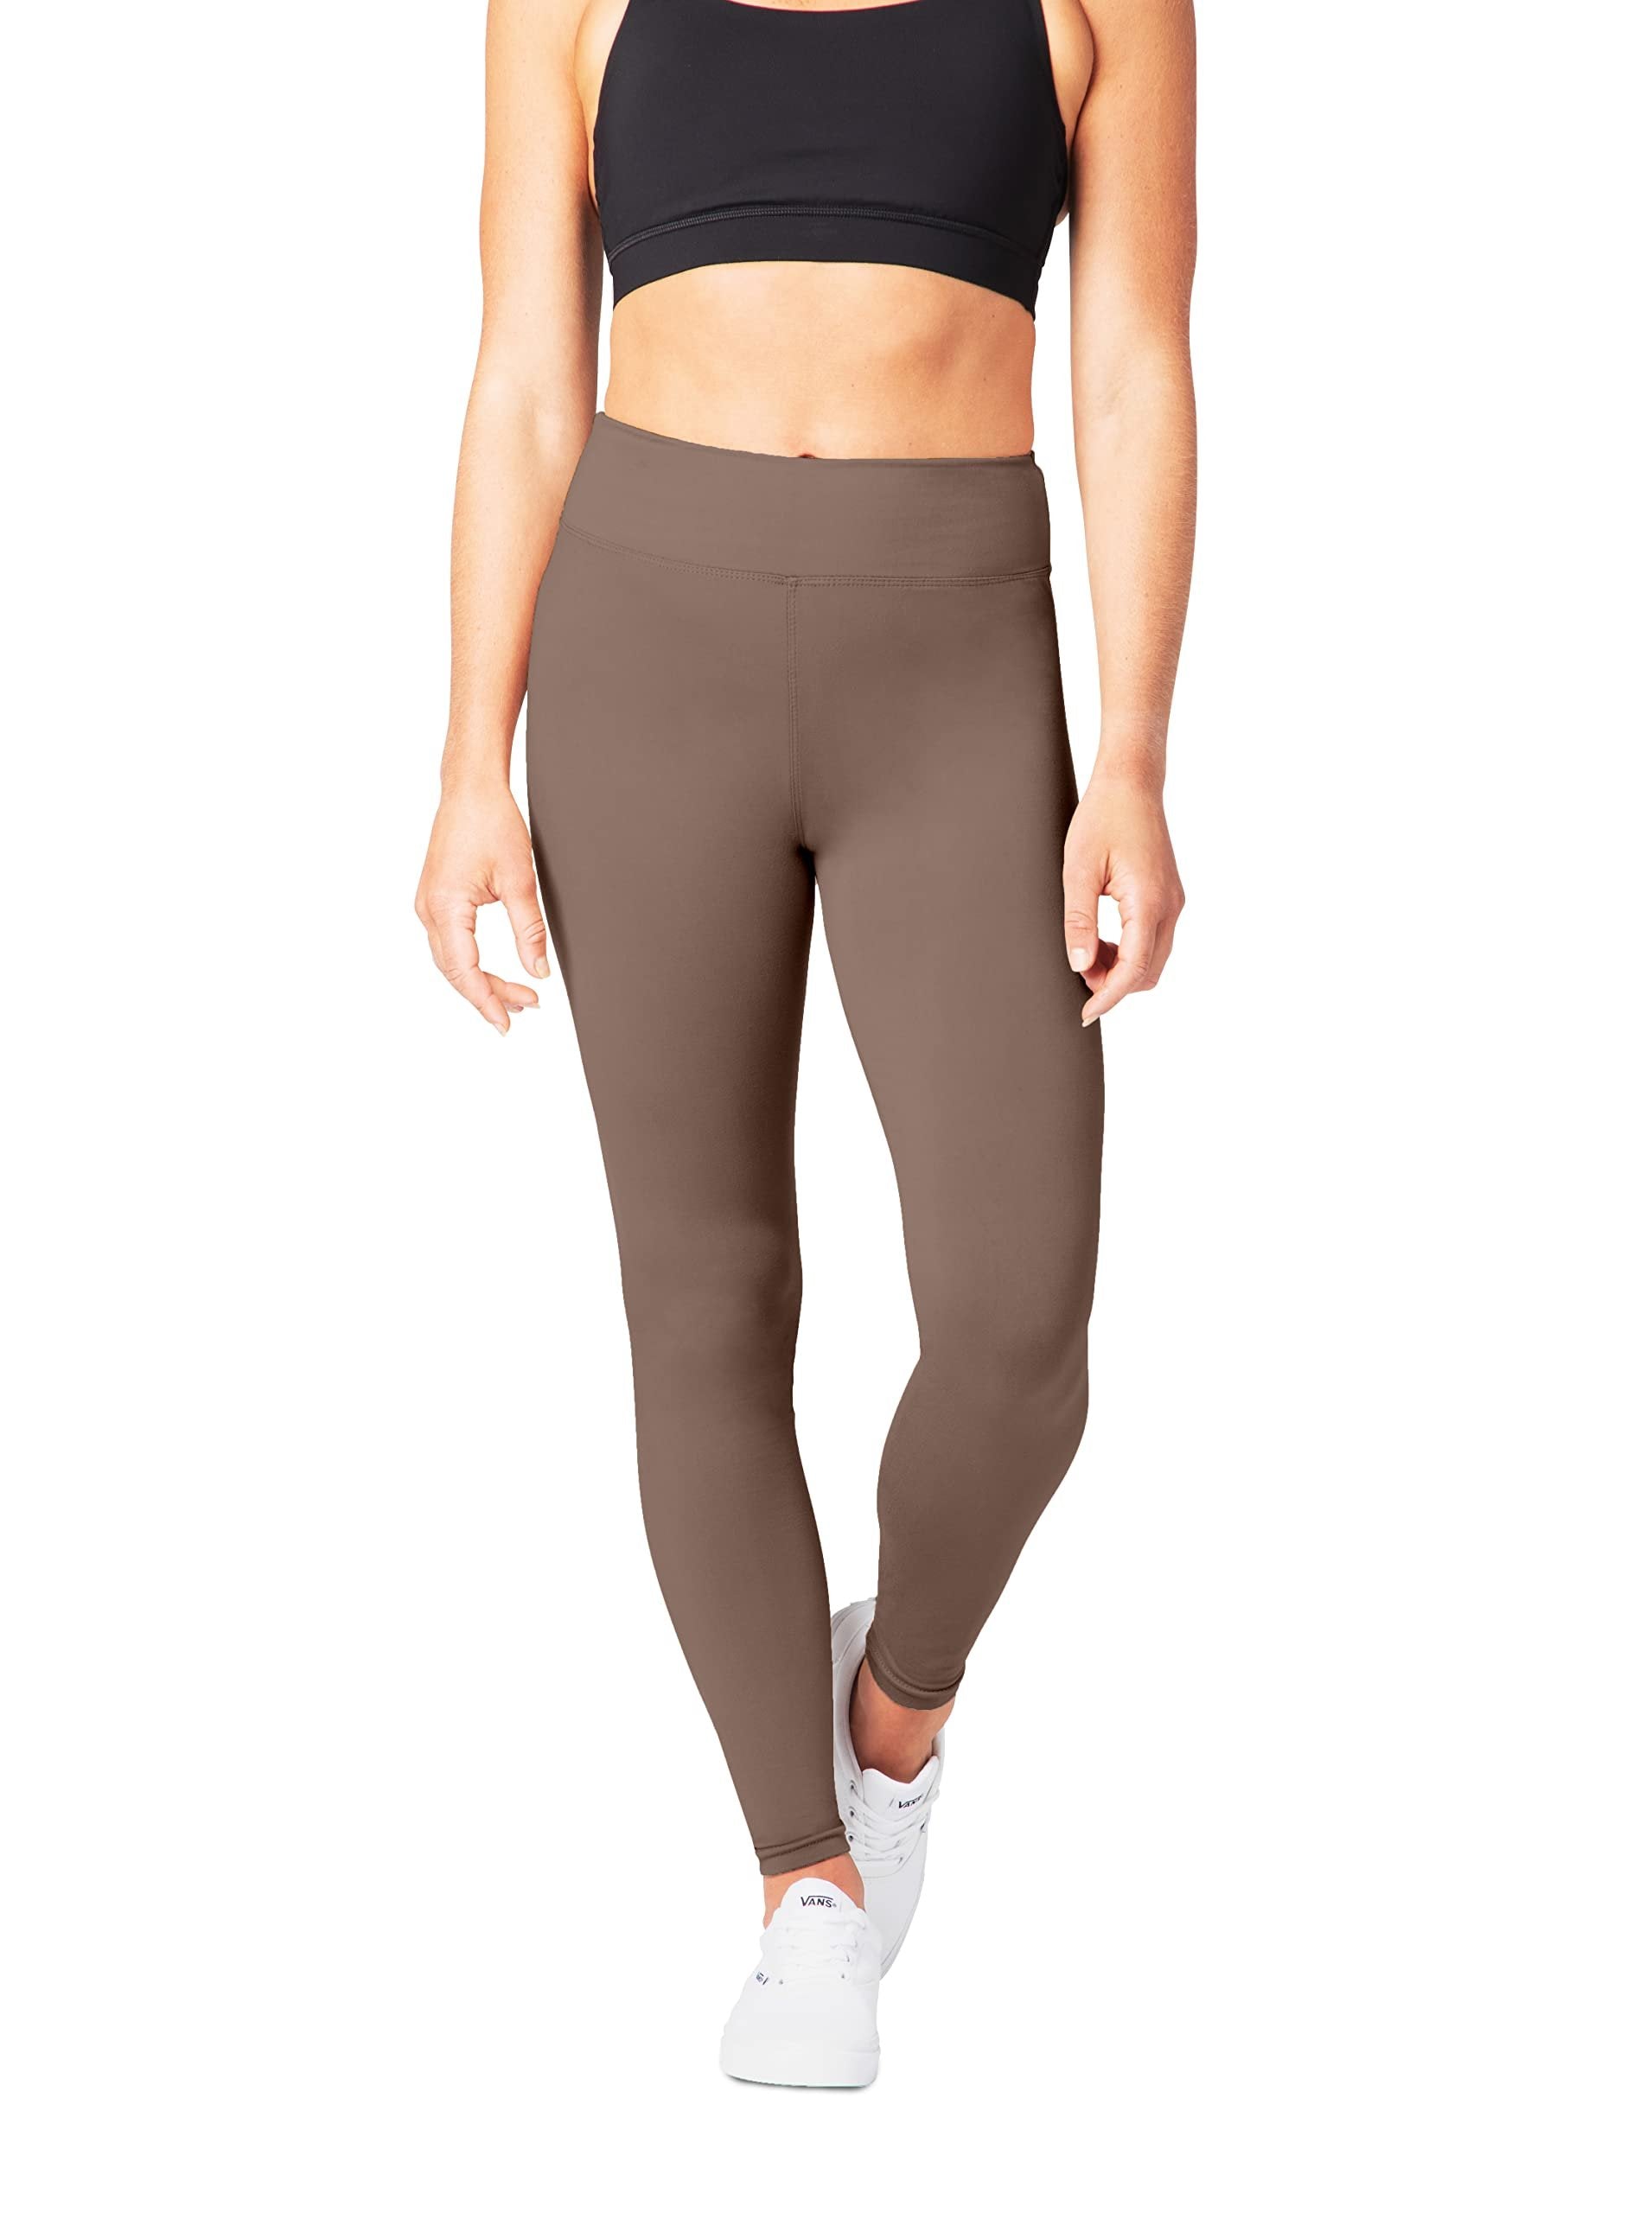 SATINA High Waisted Leggings for Women - Workout Leggings for Regular & Plus Size Women - Tan Leggings Women - Yoga Leggings for Women |3 Inch Waistband (Plus Size, Tan)